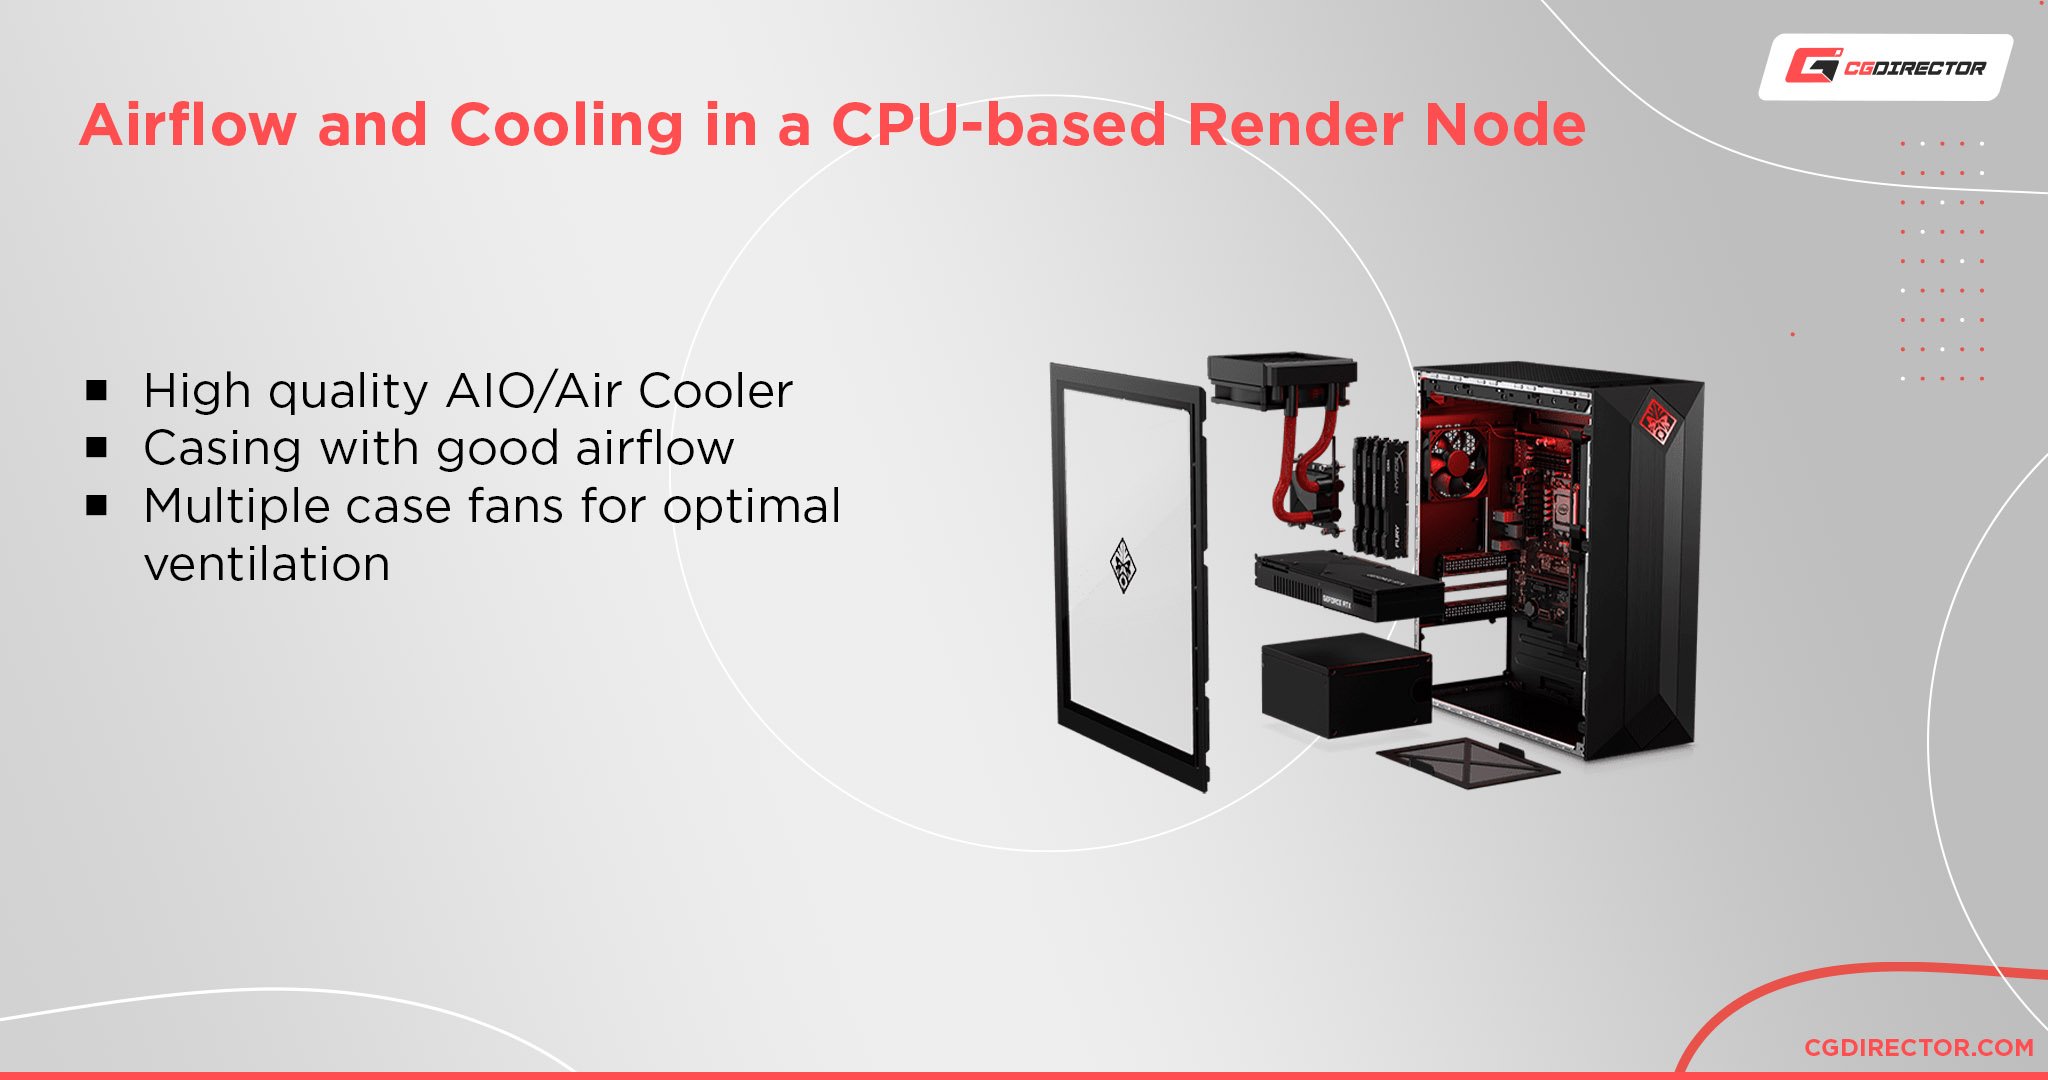 Airflow and Cooling in a CPU-based Render Node